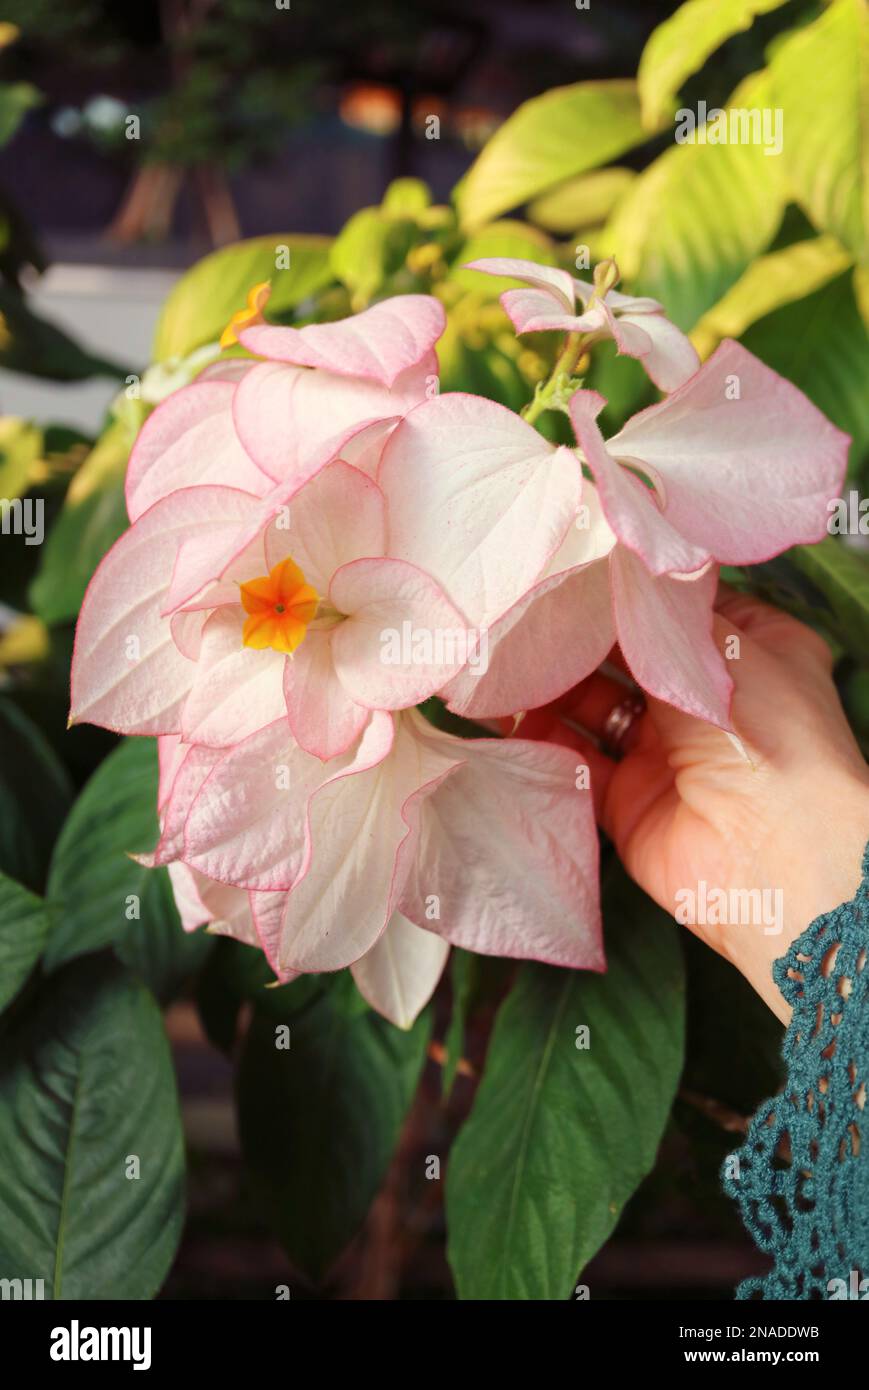 Hand Touching Light Pink Sepal of Mussaenda Philippica Queen Sirikit, Flower's Named in Honor of Queen Sirikit of Thailand by the Philippine Governmen Stock Photo